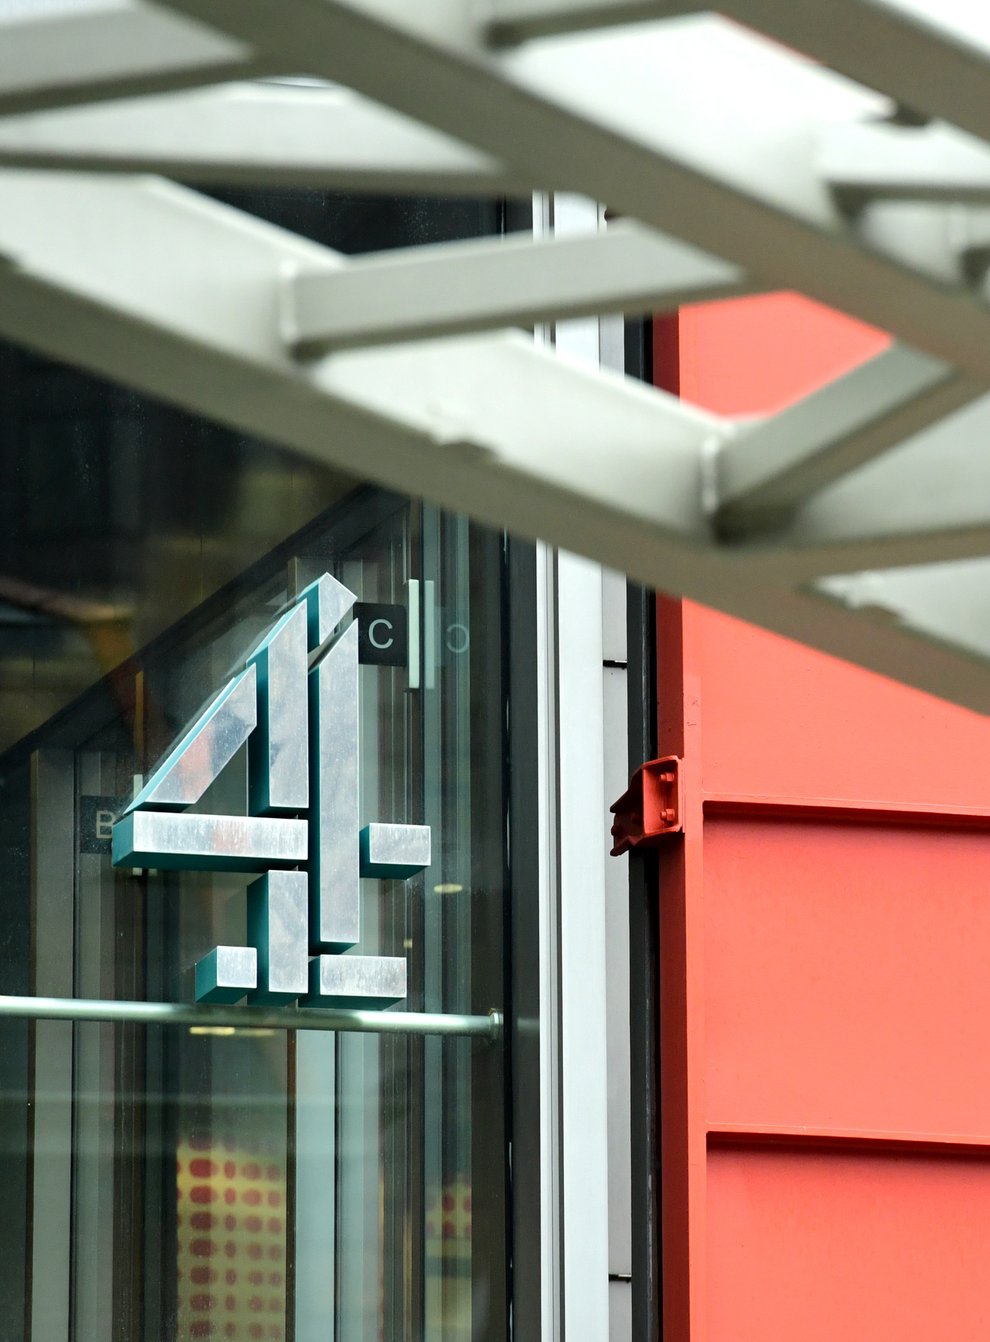 Channel 4 ‘disappointed’ as Government’s proceeds with privatisation plans (Ian West/PA)